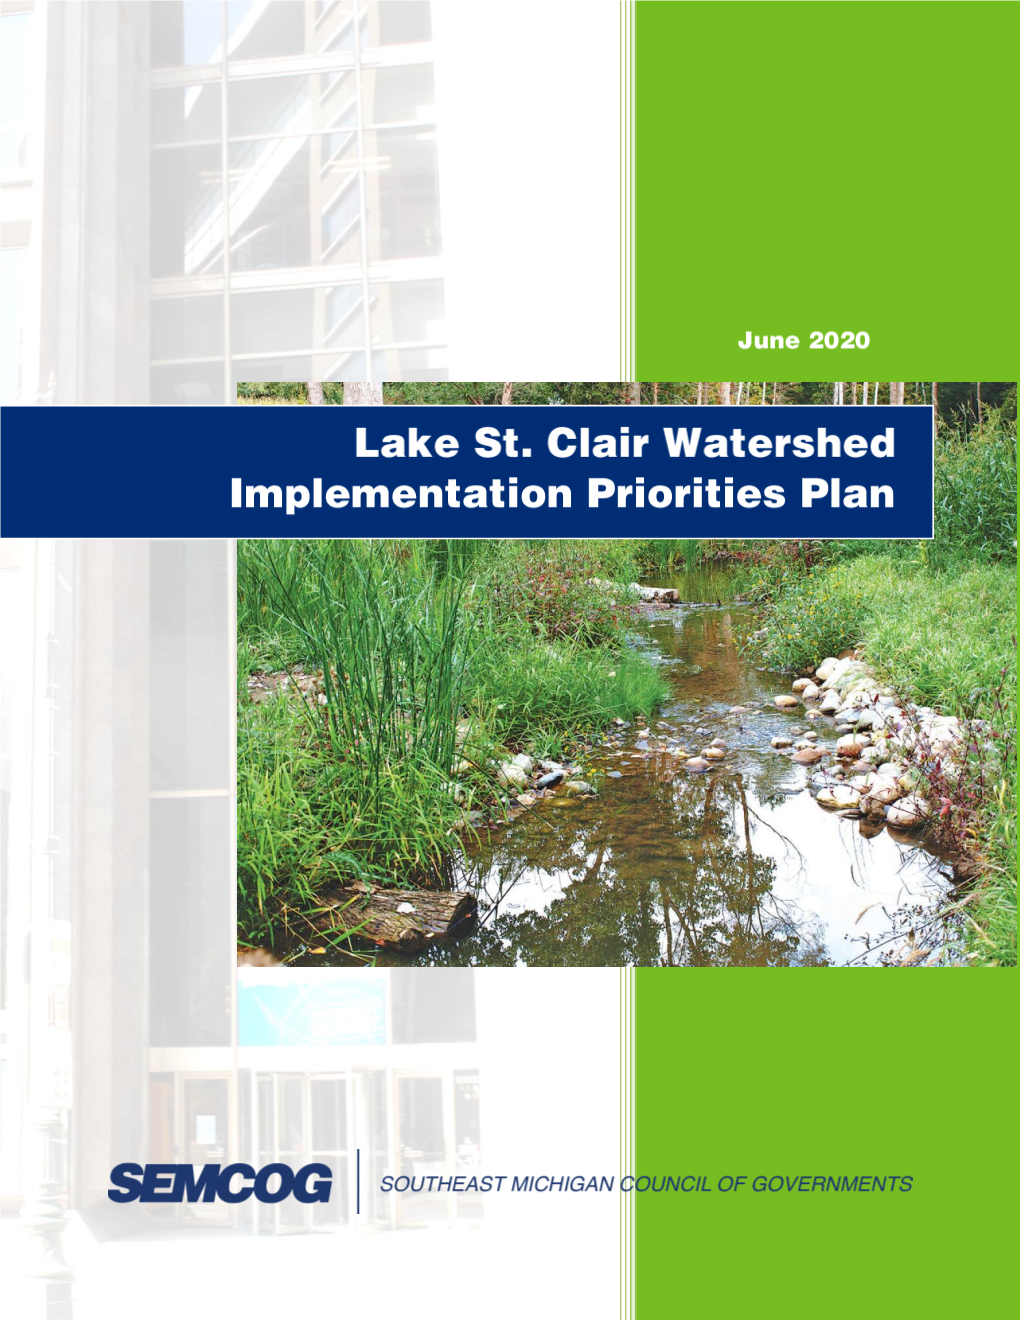 Lake St. Clair Watershed Implementation Priorities Plan (WIPP) Guides Implementation of the St